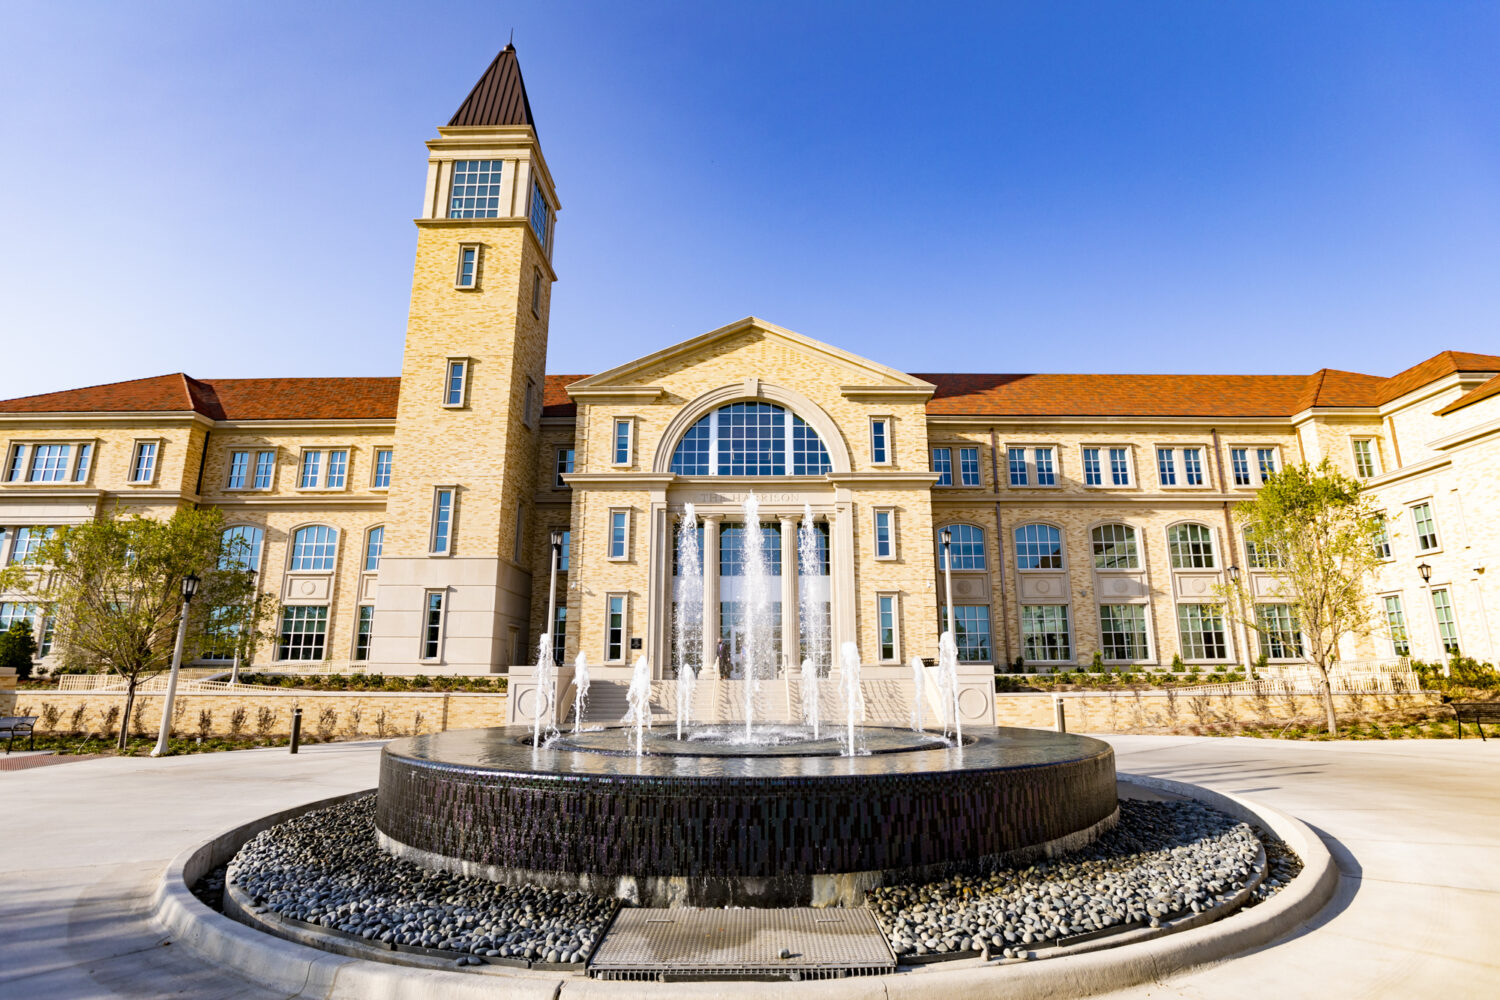 Tcu Petition · Relieving Tuition Cost for TCU Students and 2020